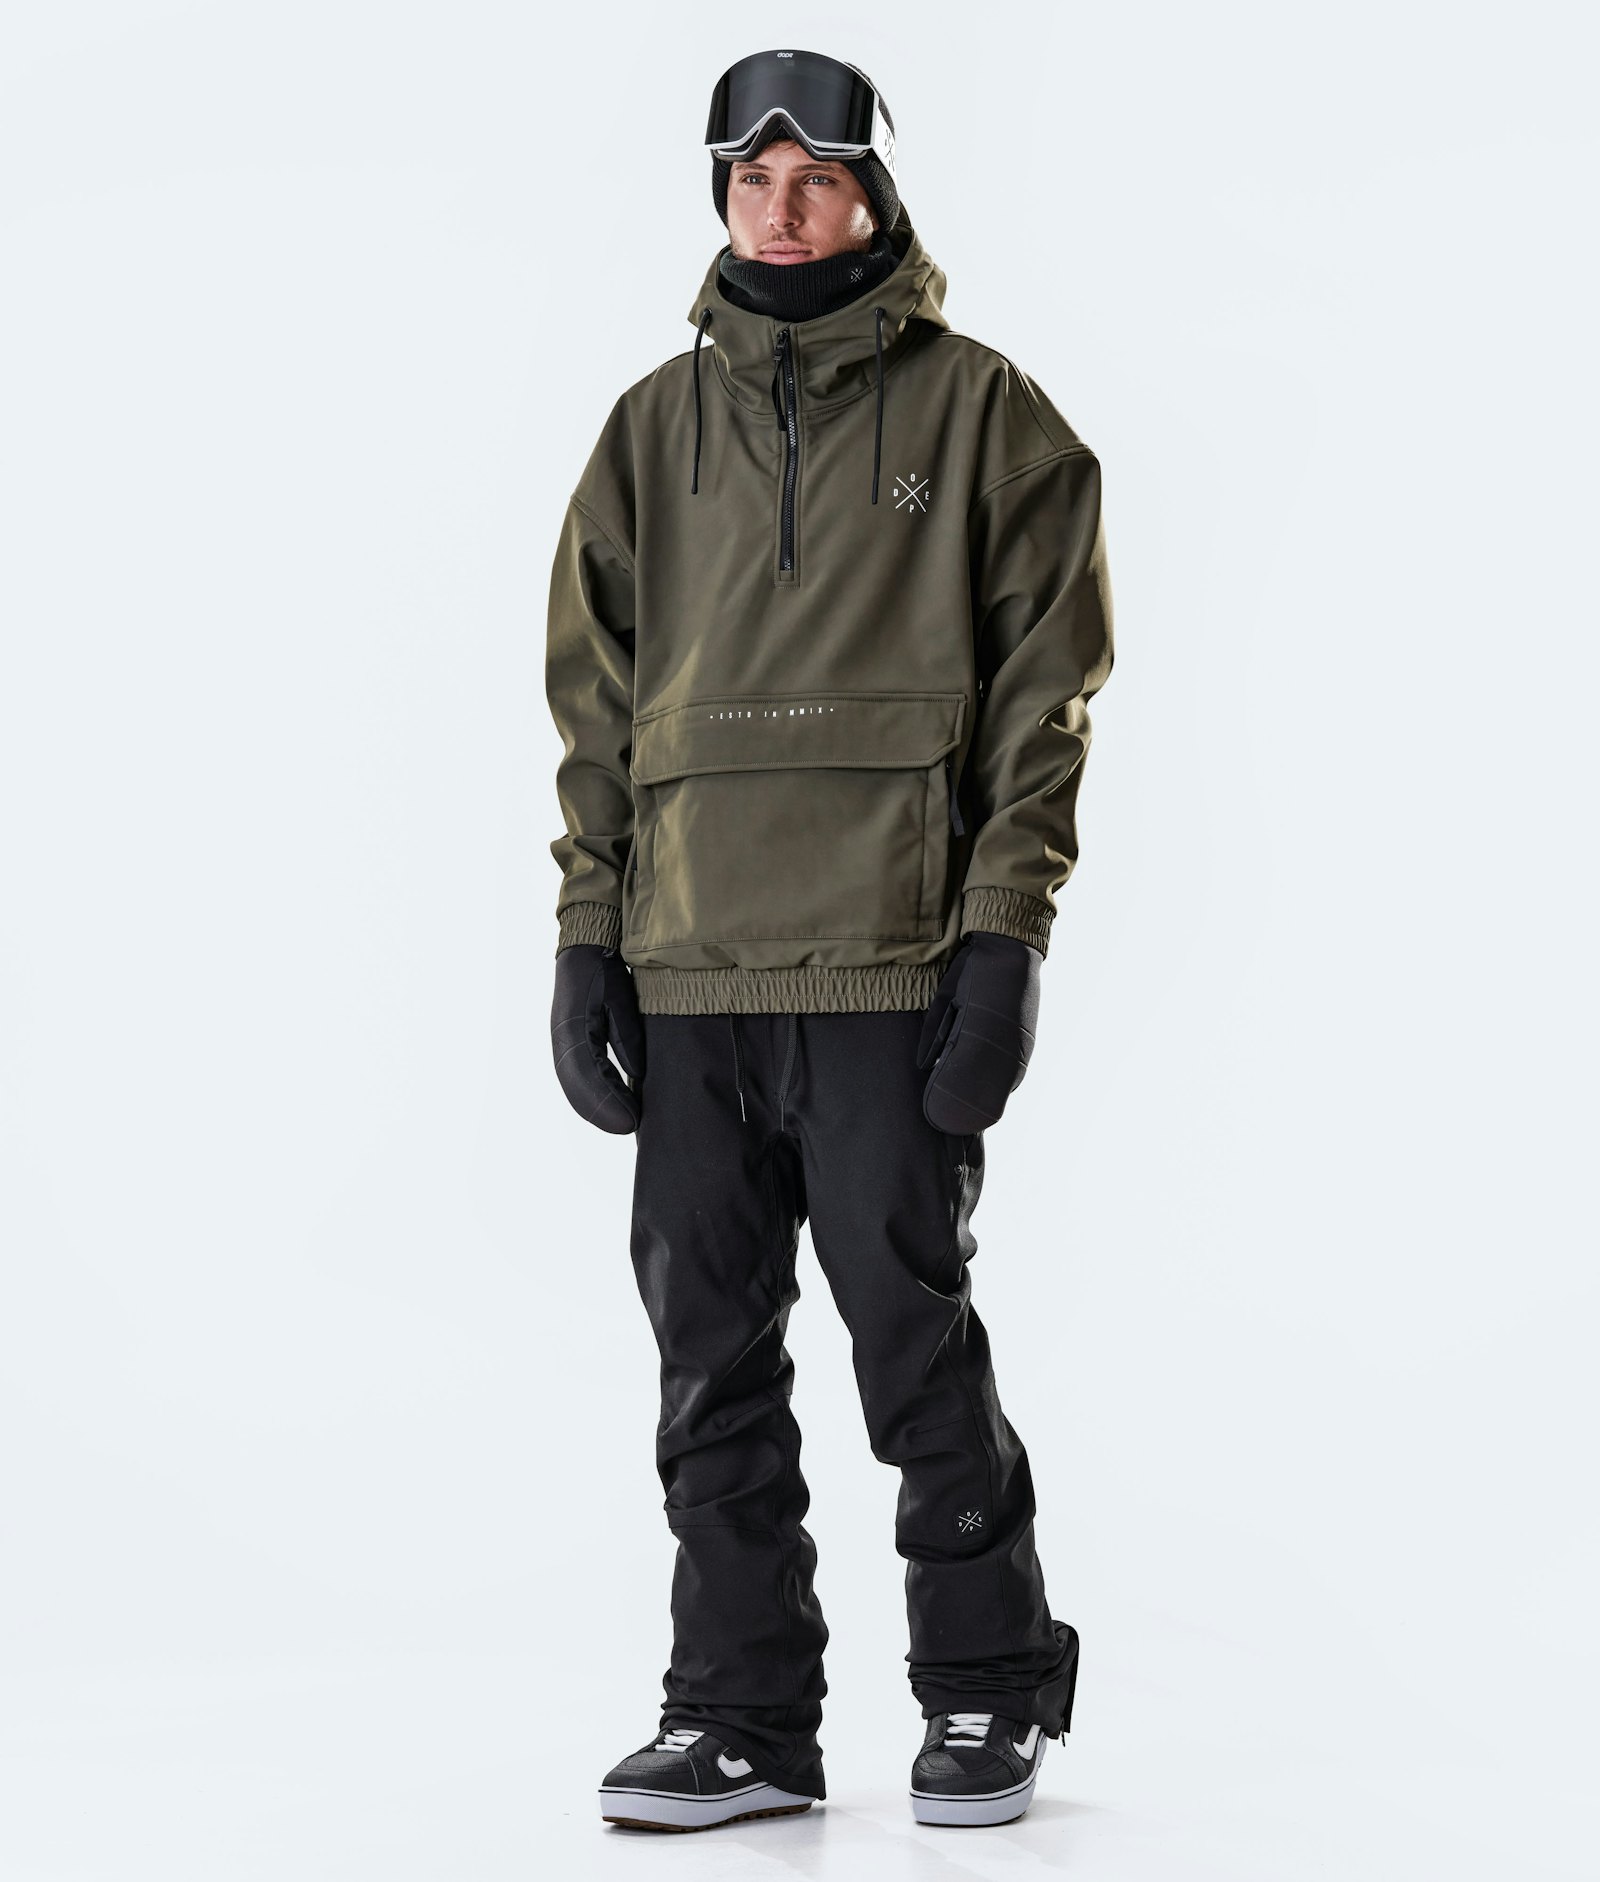 Dope Cyclone 2020 Veste Snowboard Homme Olive Green